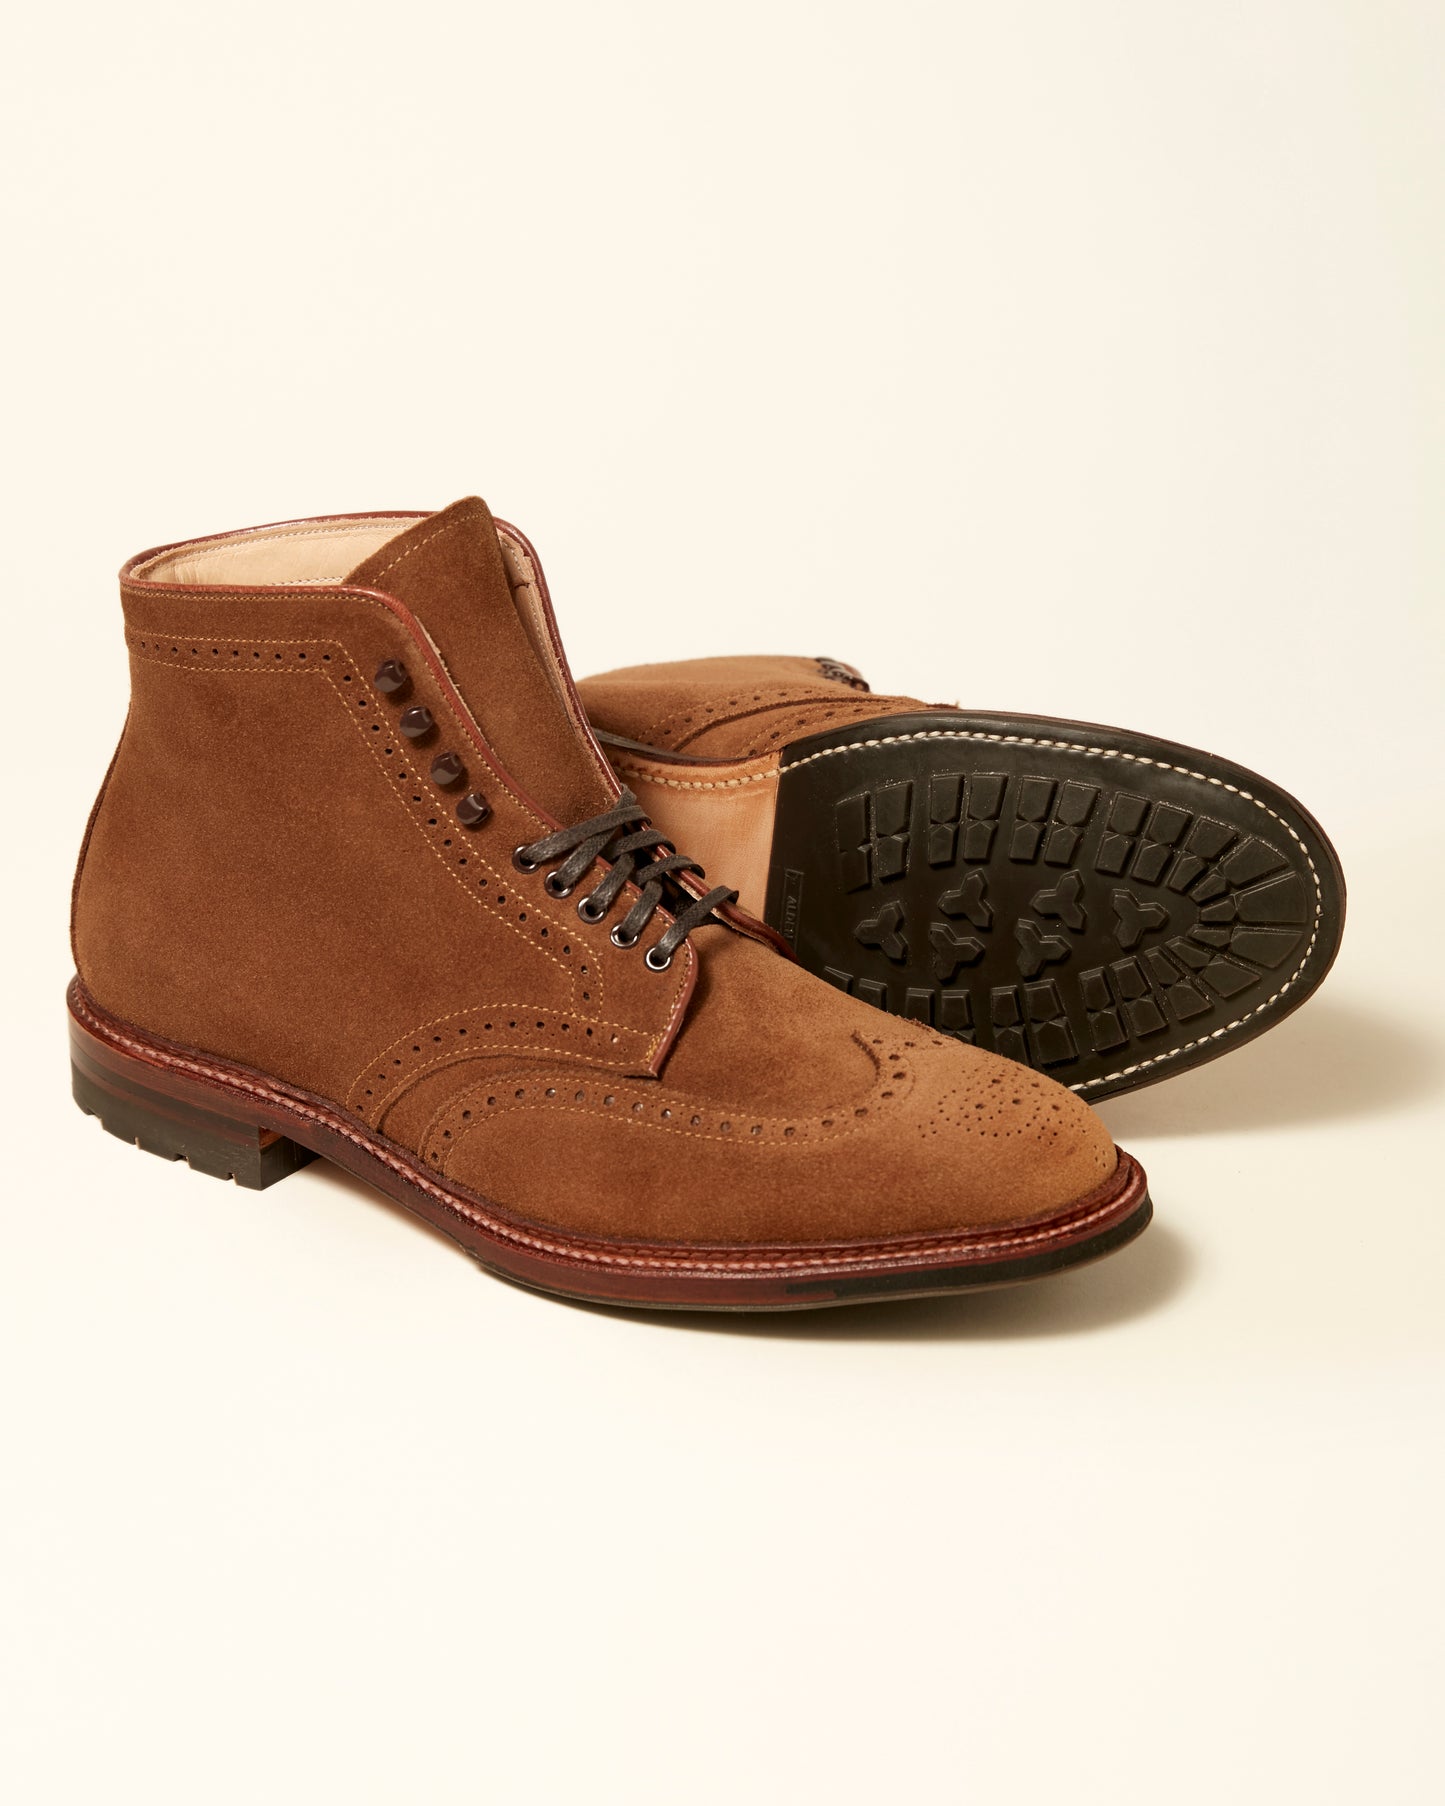 "Yenni" Wing Tip Boot in Snuff Suede, Barrie Last